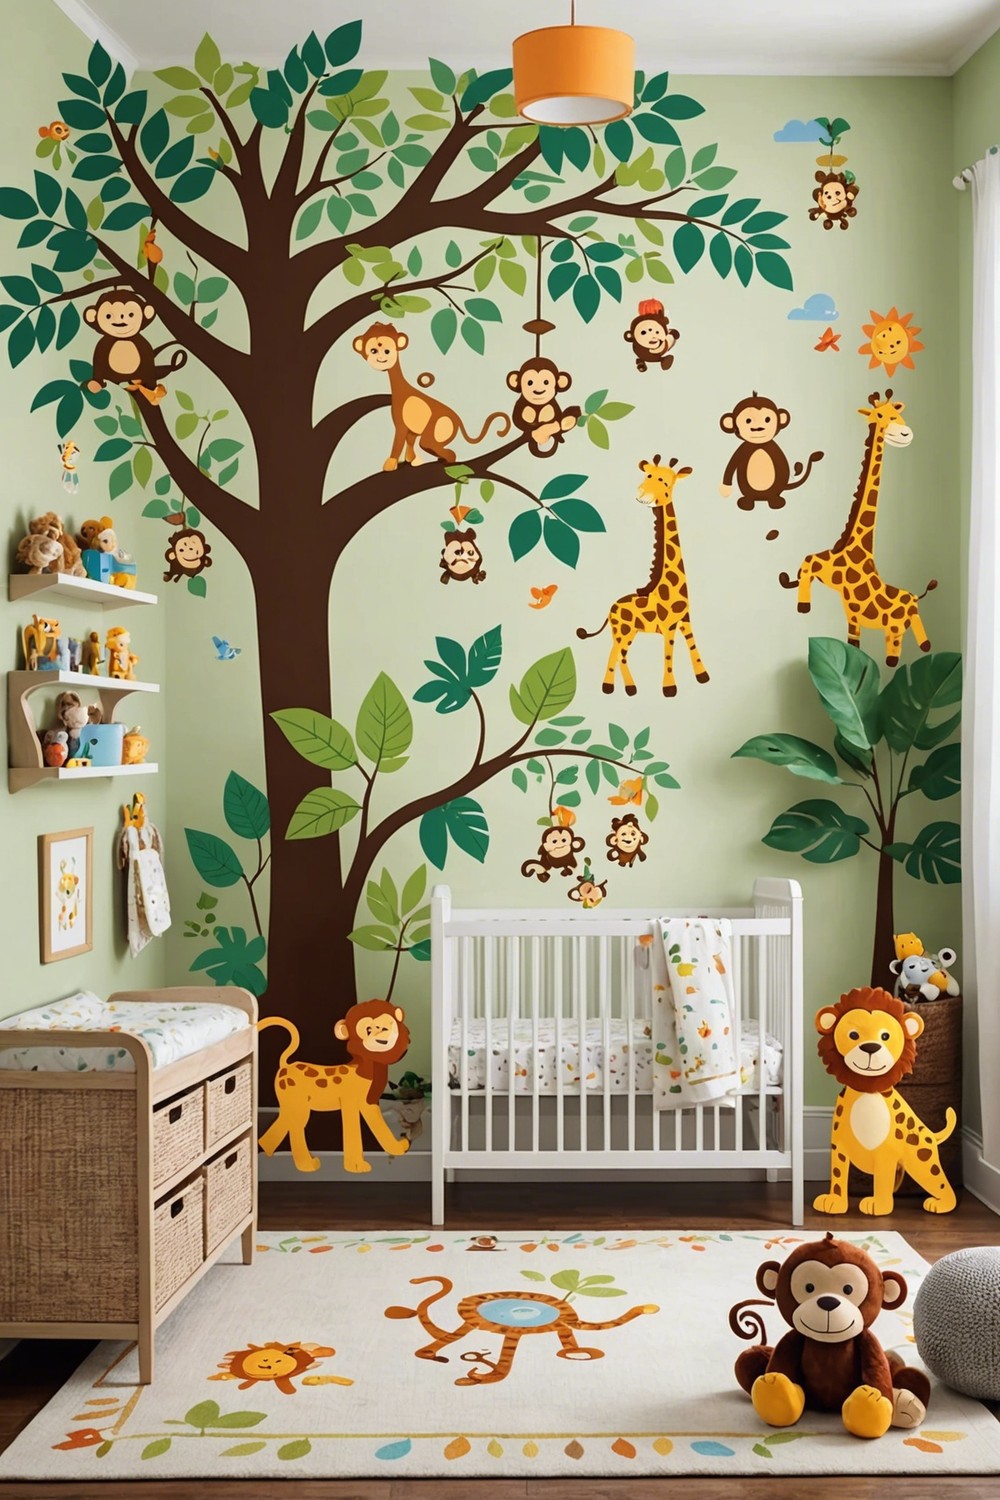 Jungle Adventure Nursery with Fun Wall Decals